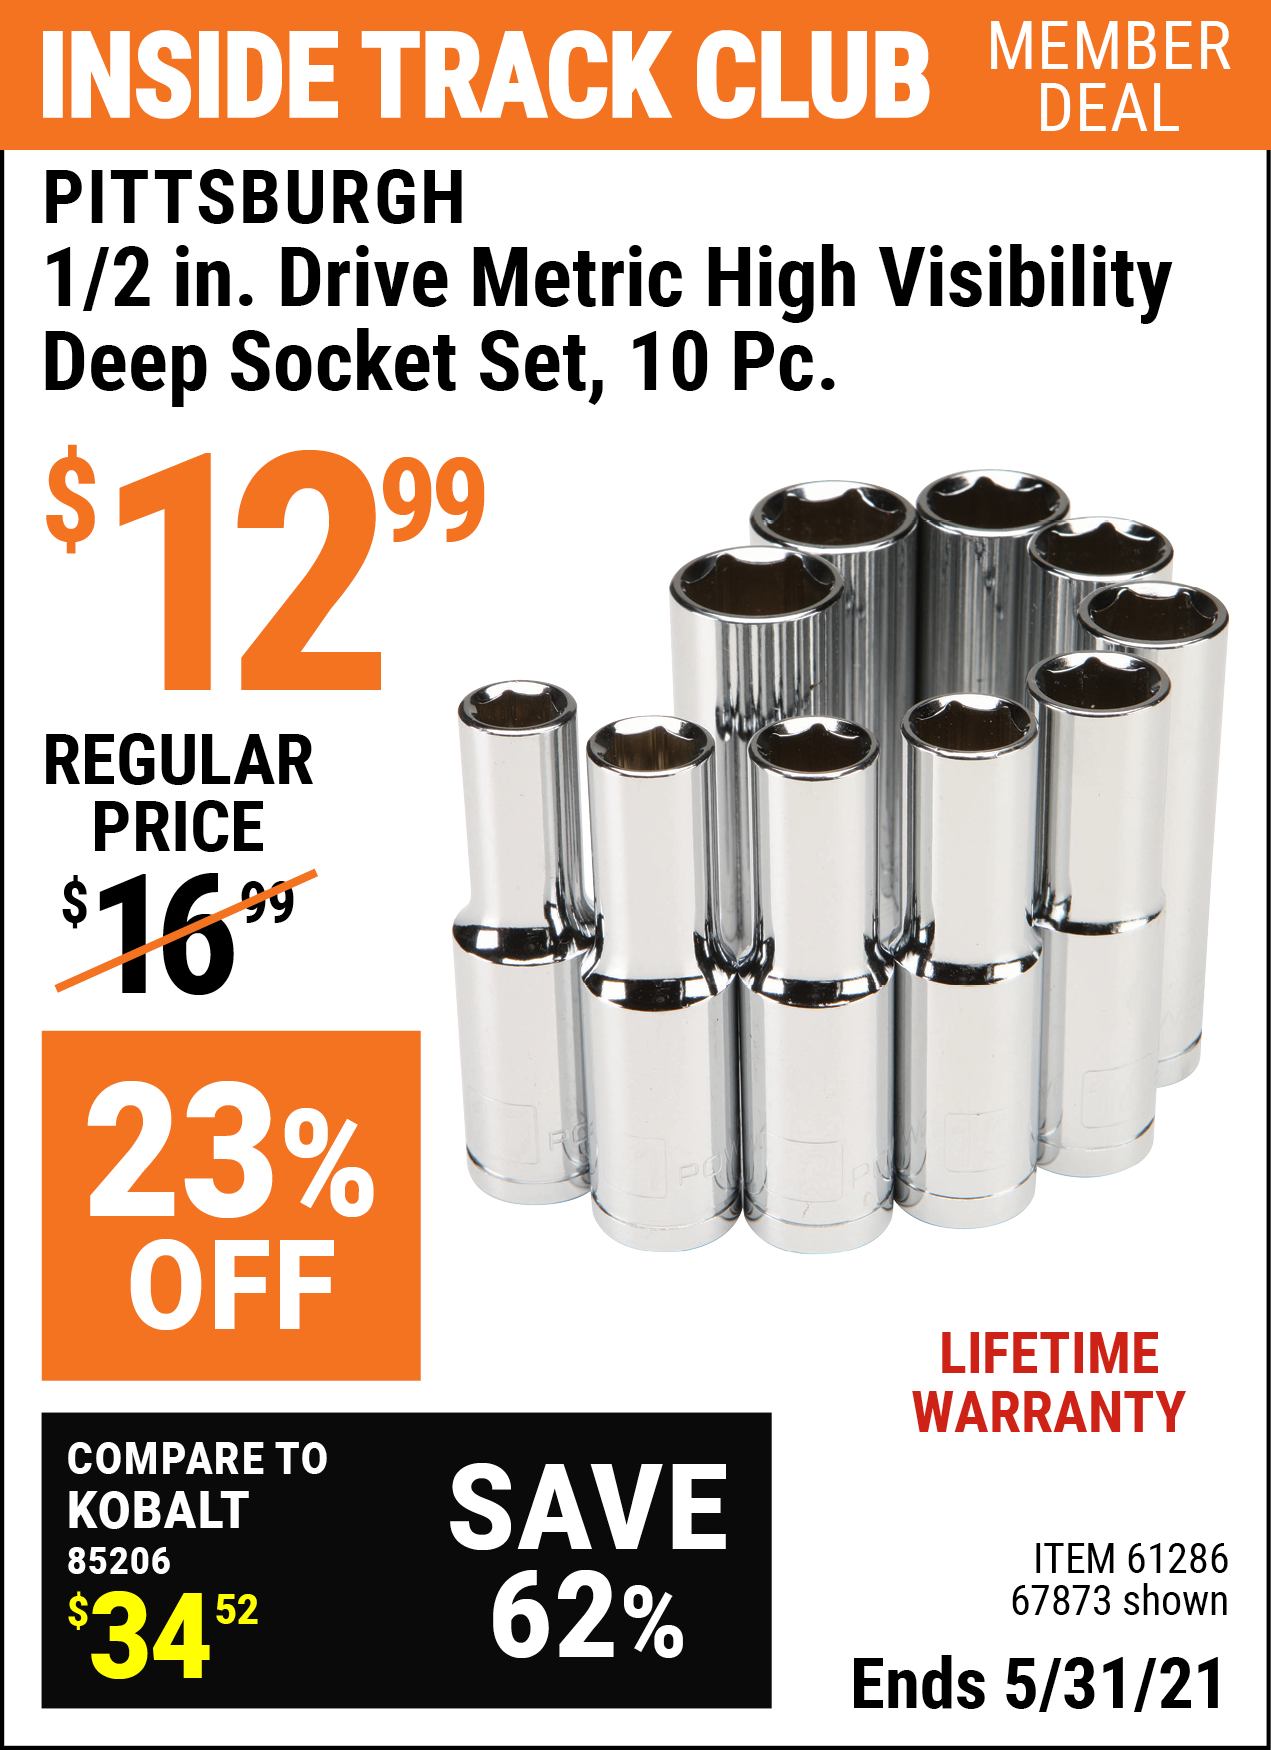 Inside Track Club members can buy the PITTSBURGH 1/2 in. Drive Metric High Visibility Deep Socket 10 Pc. (Item 67873/61286) for $12.99, valid through 5/31/2021.